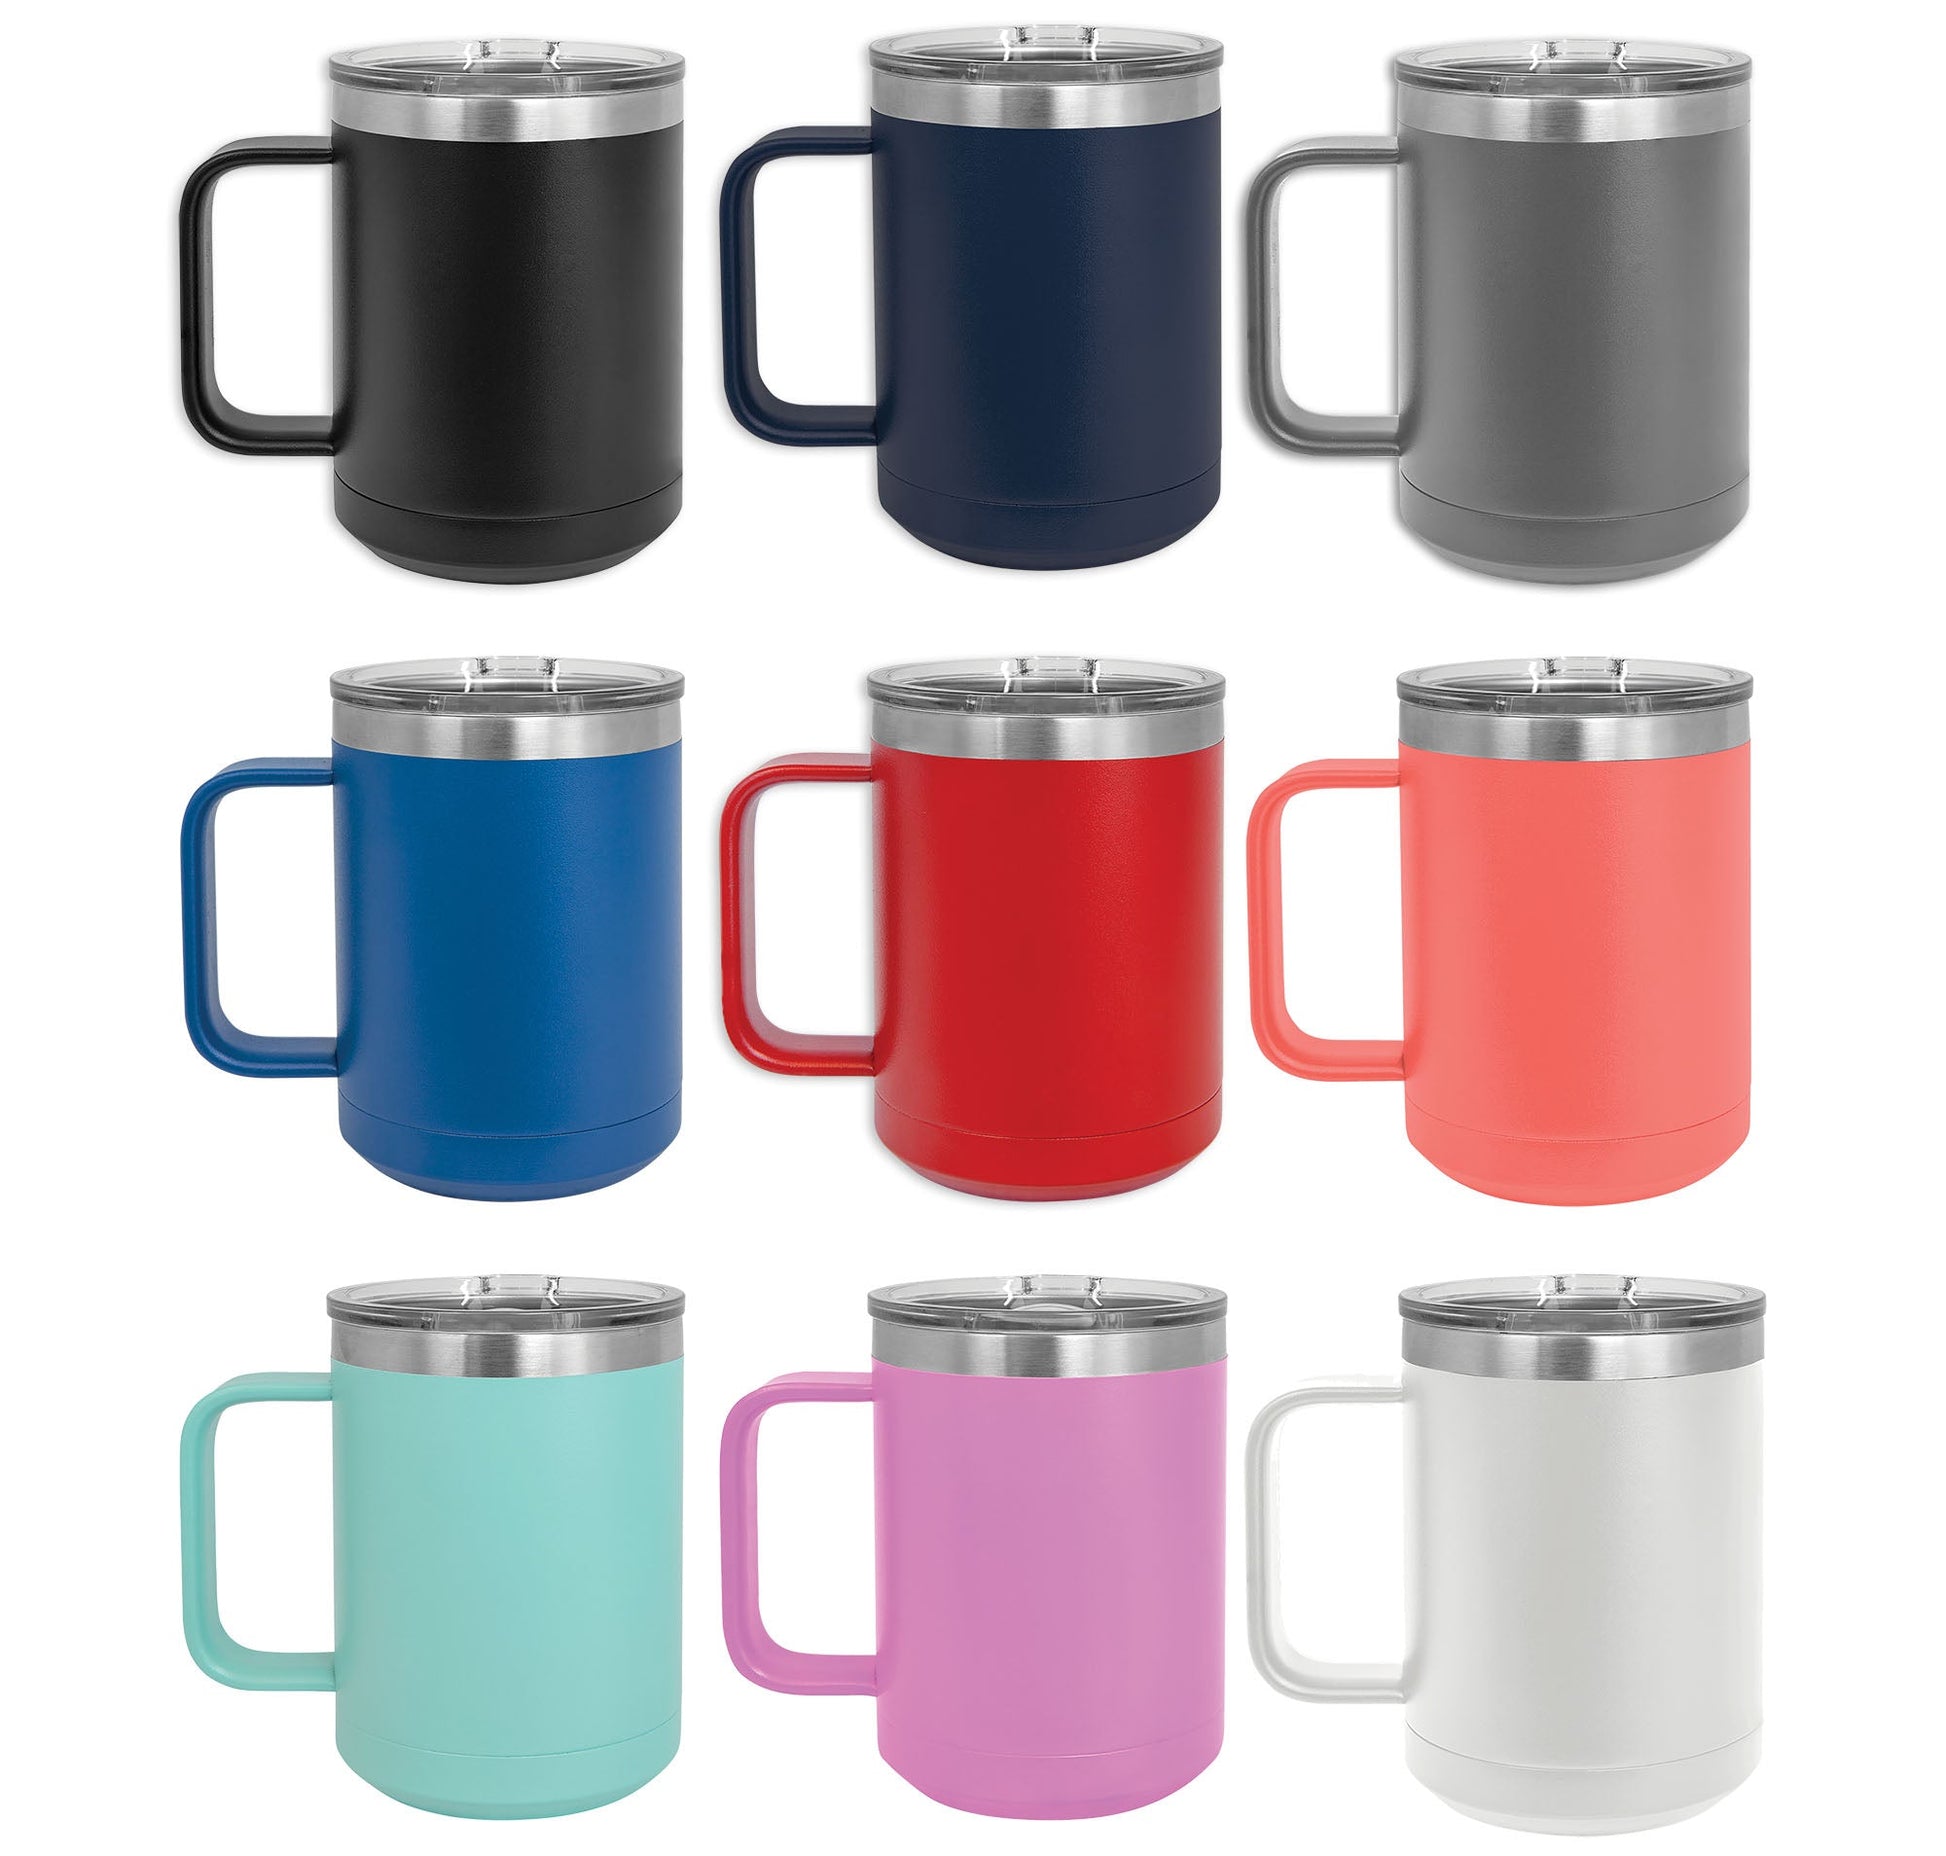 Metal Coffee Mugs  Mom Define - etchthisout